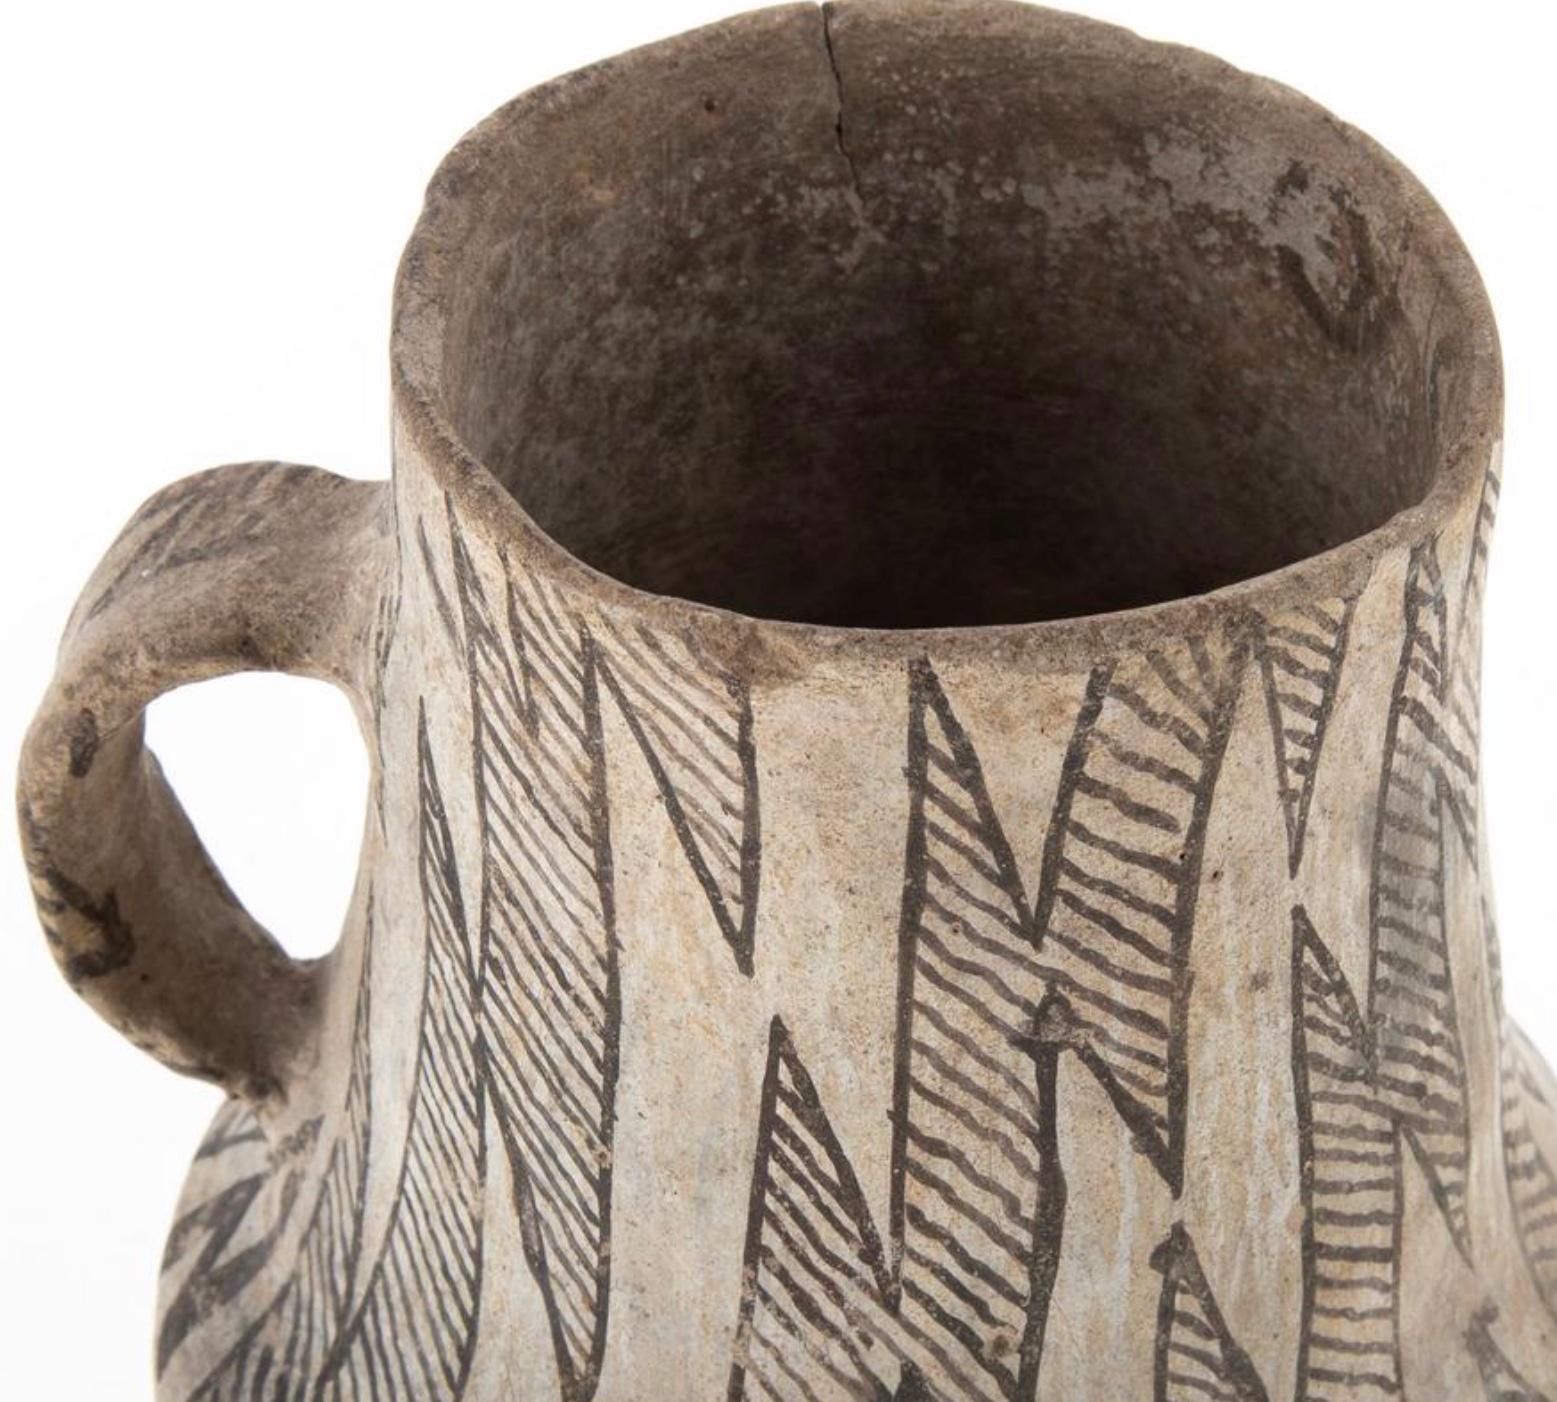 A very nice and intact Anasazi black on white Snowflake pitcher with painted basket geometric design around body. Remains in as found condition. A rare intact, large pottery pitcher, painted in the style most commonly excavated at the great Anasazi